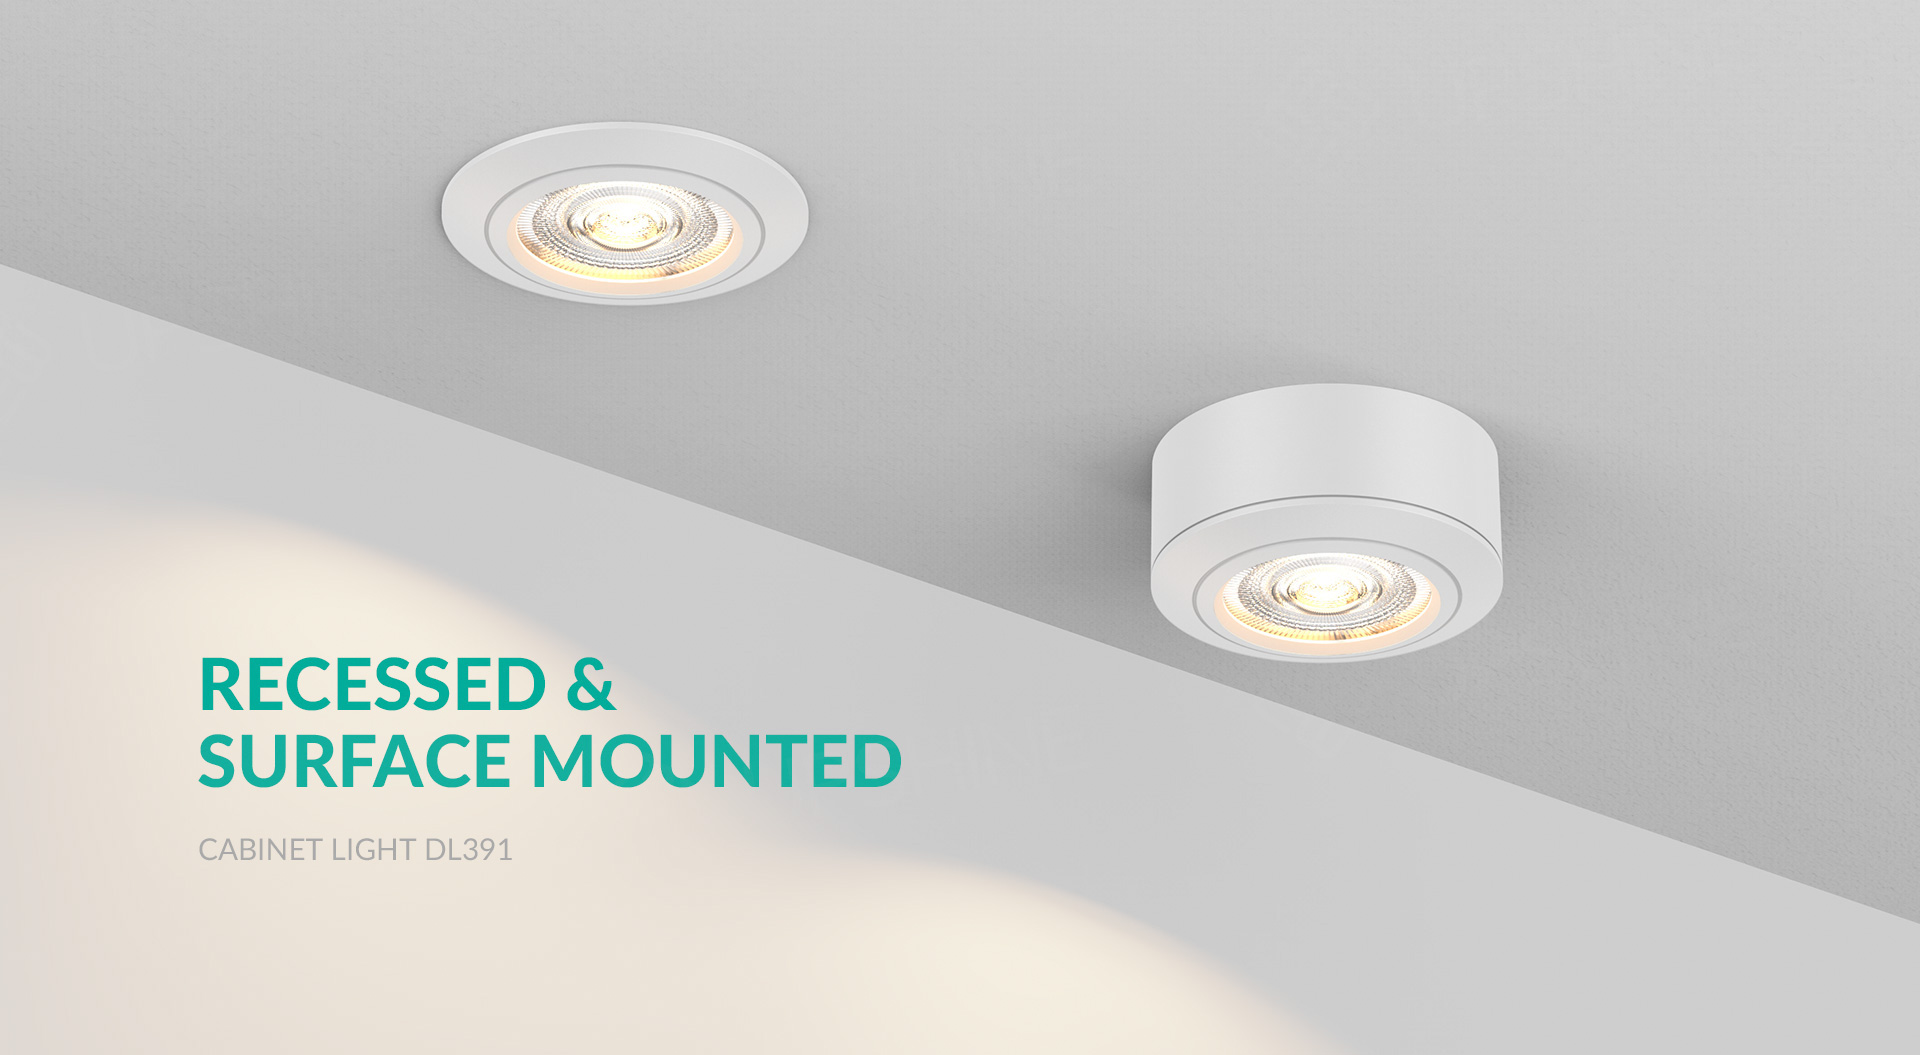 DL391 recessed surface mounted_01